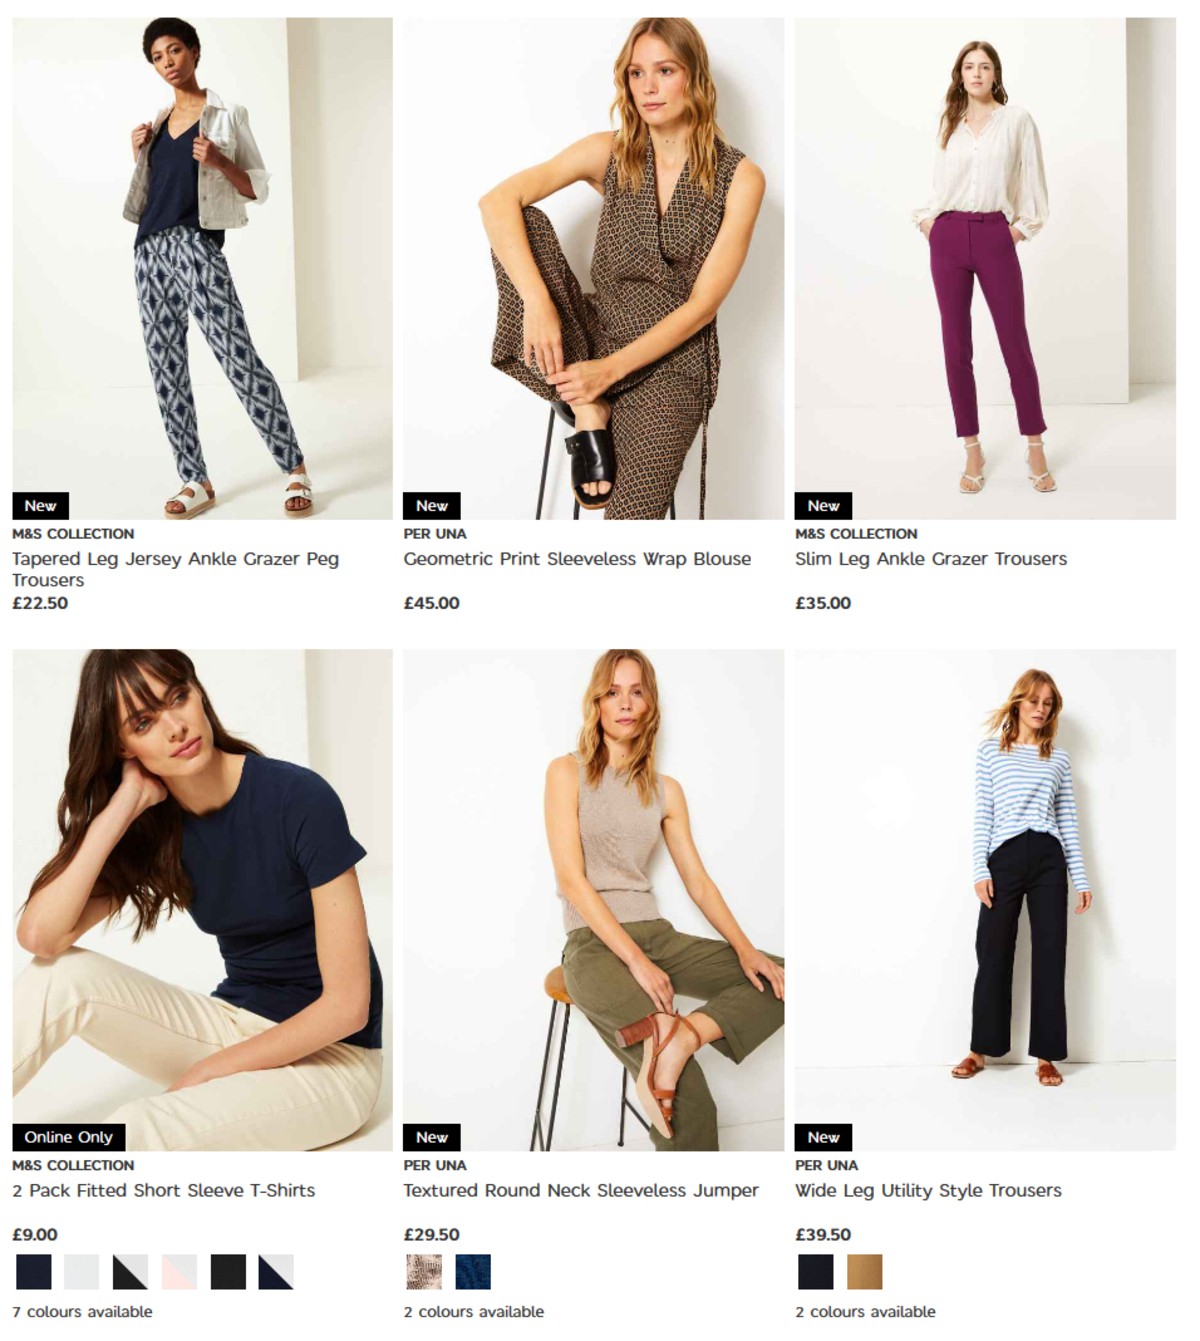 M&S Marks and Spencer Offers from 2 April